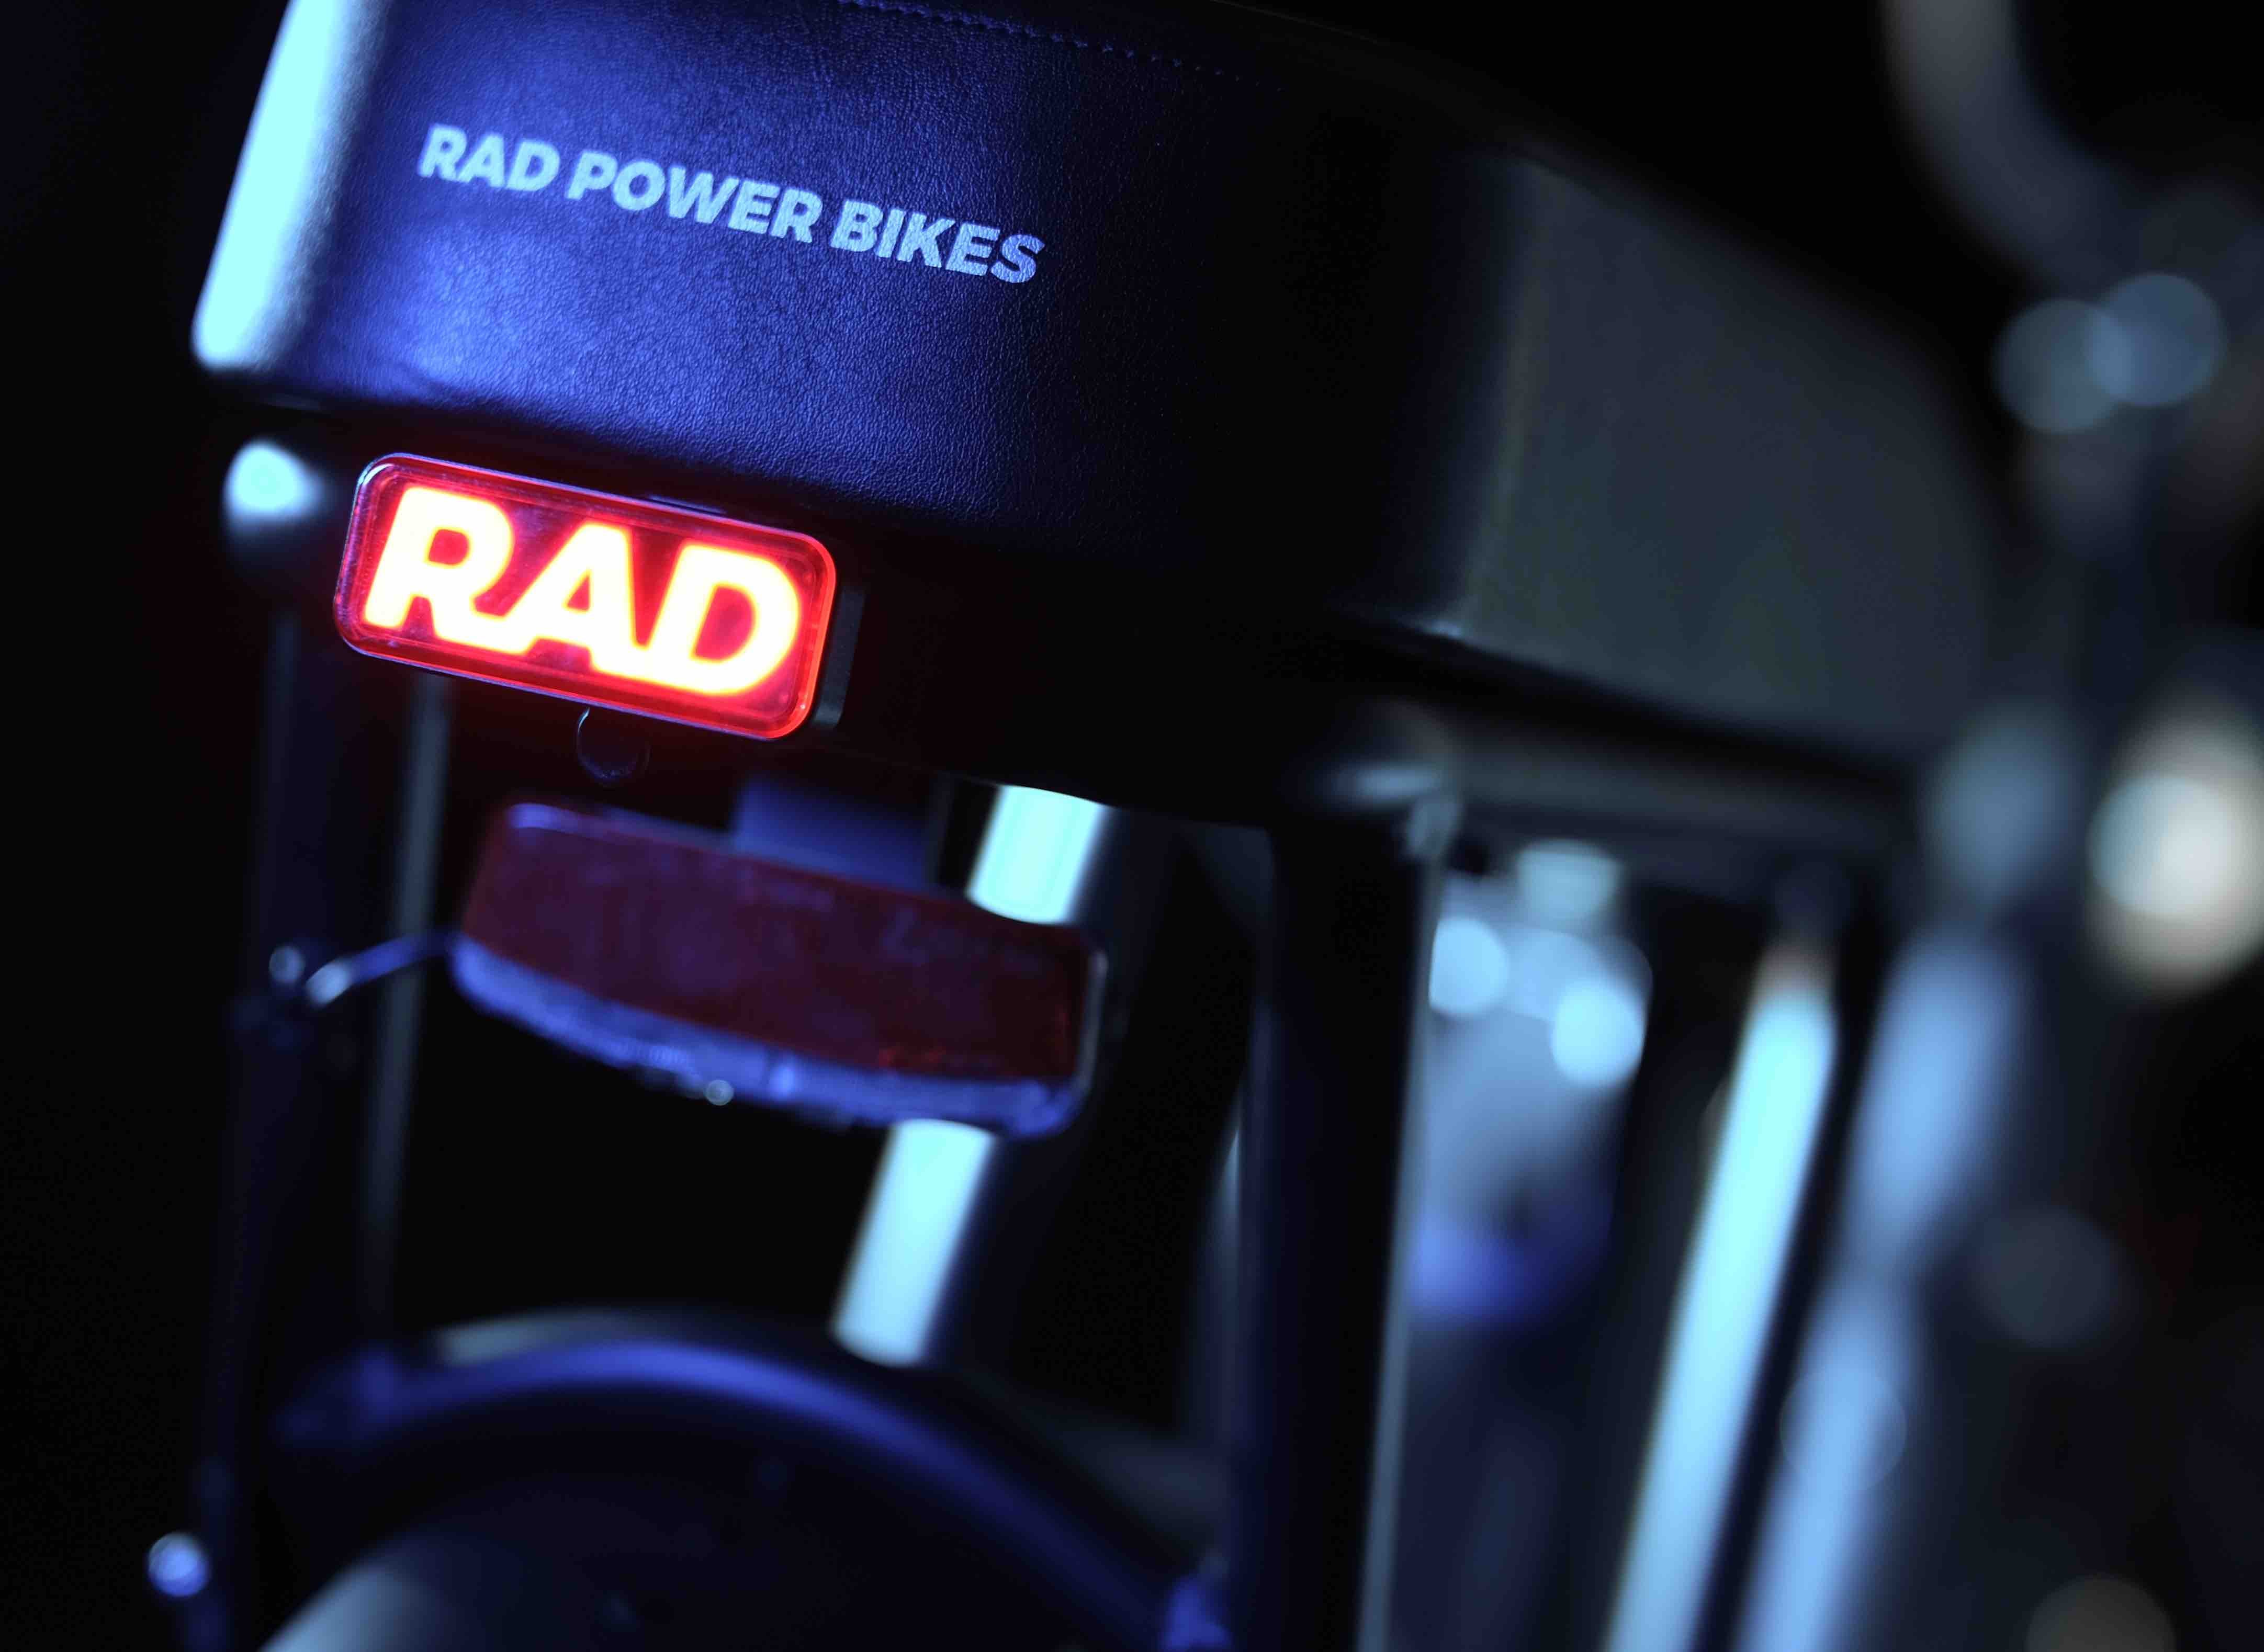 A close-up of a red tail light featuring the word "Rad" at night.